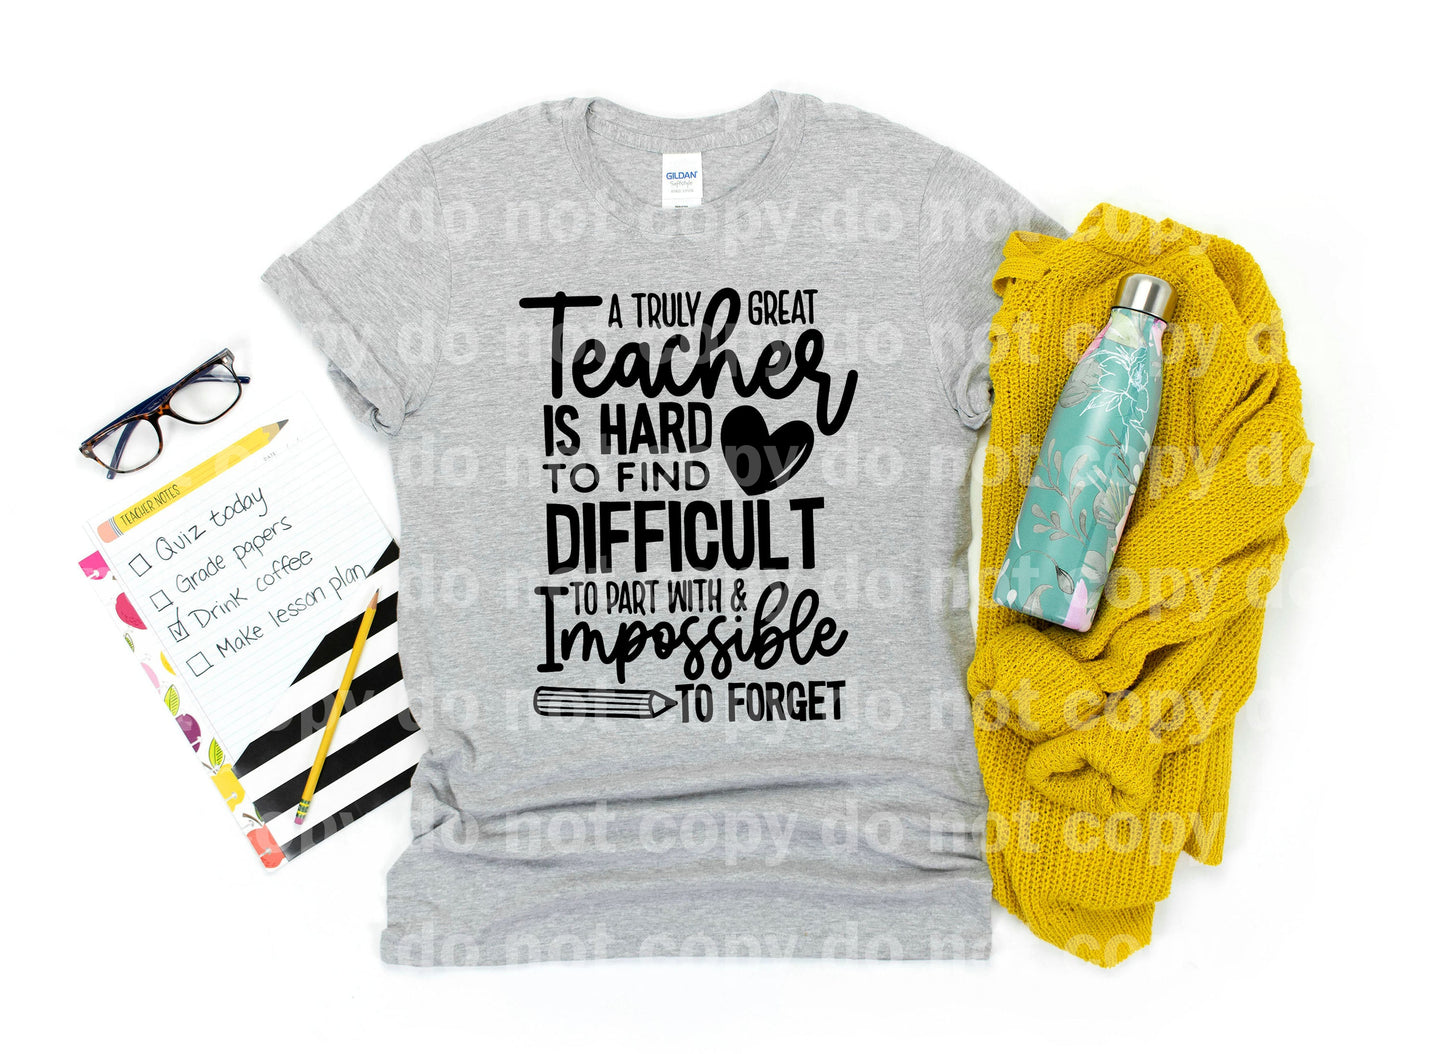 A Truly Great Teacher is Hard to Find Difficult to Part & Impossible to Forget Dream Print or Sublimation Print